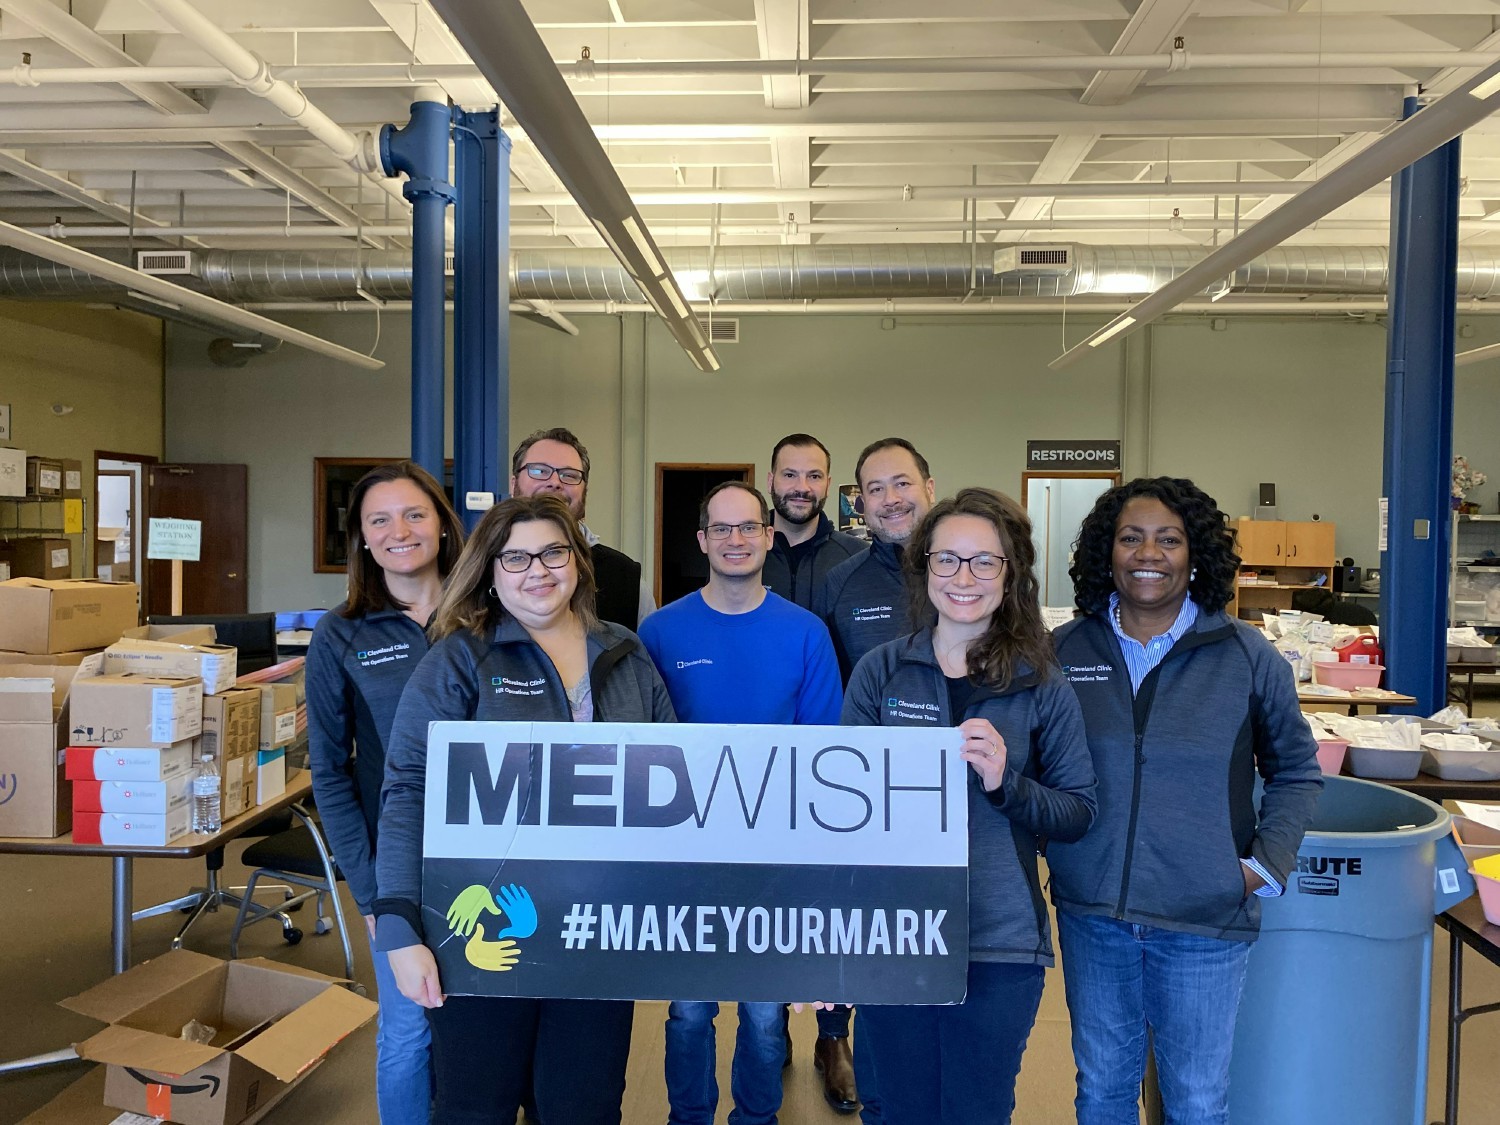 Our time is limited but our compassion is not. Caregivers from HR Operations made time to volunteer at MedWish